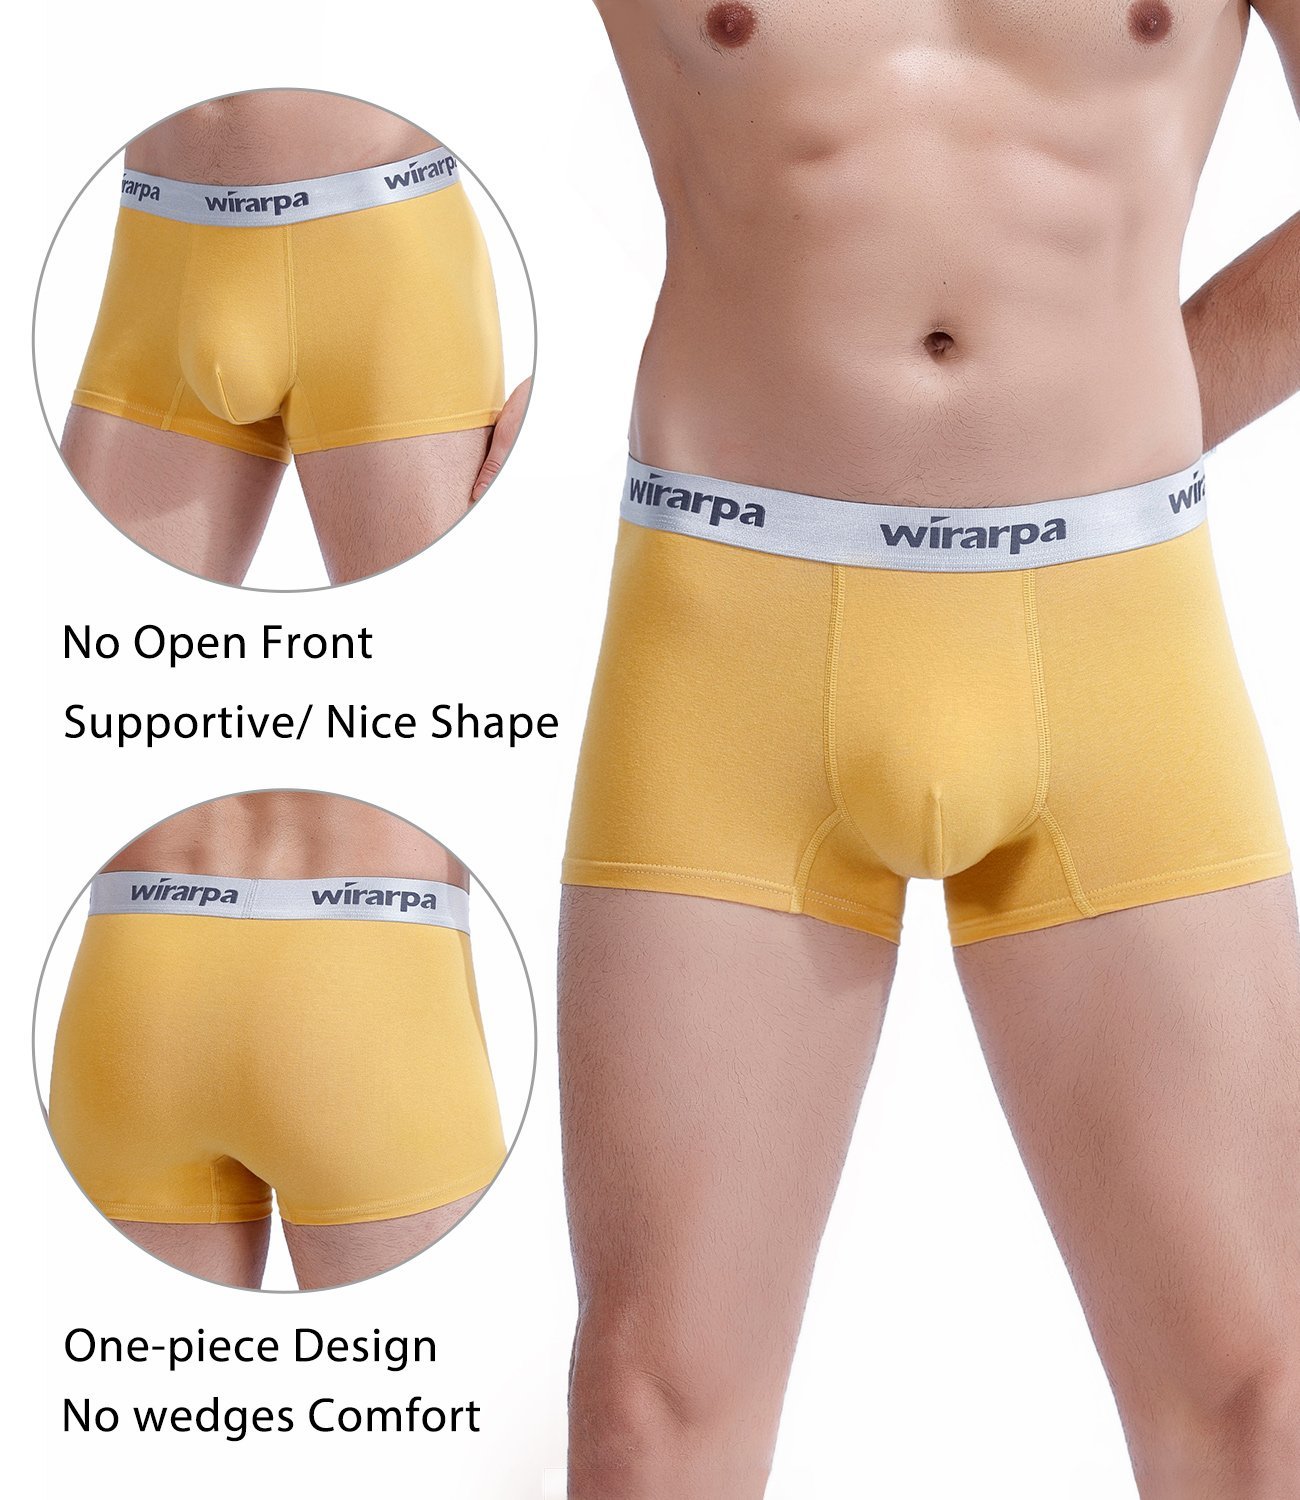 wirarpa Men’s Tagless Cotton Stretch Trunks with Wide Waistband 4 Pack